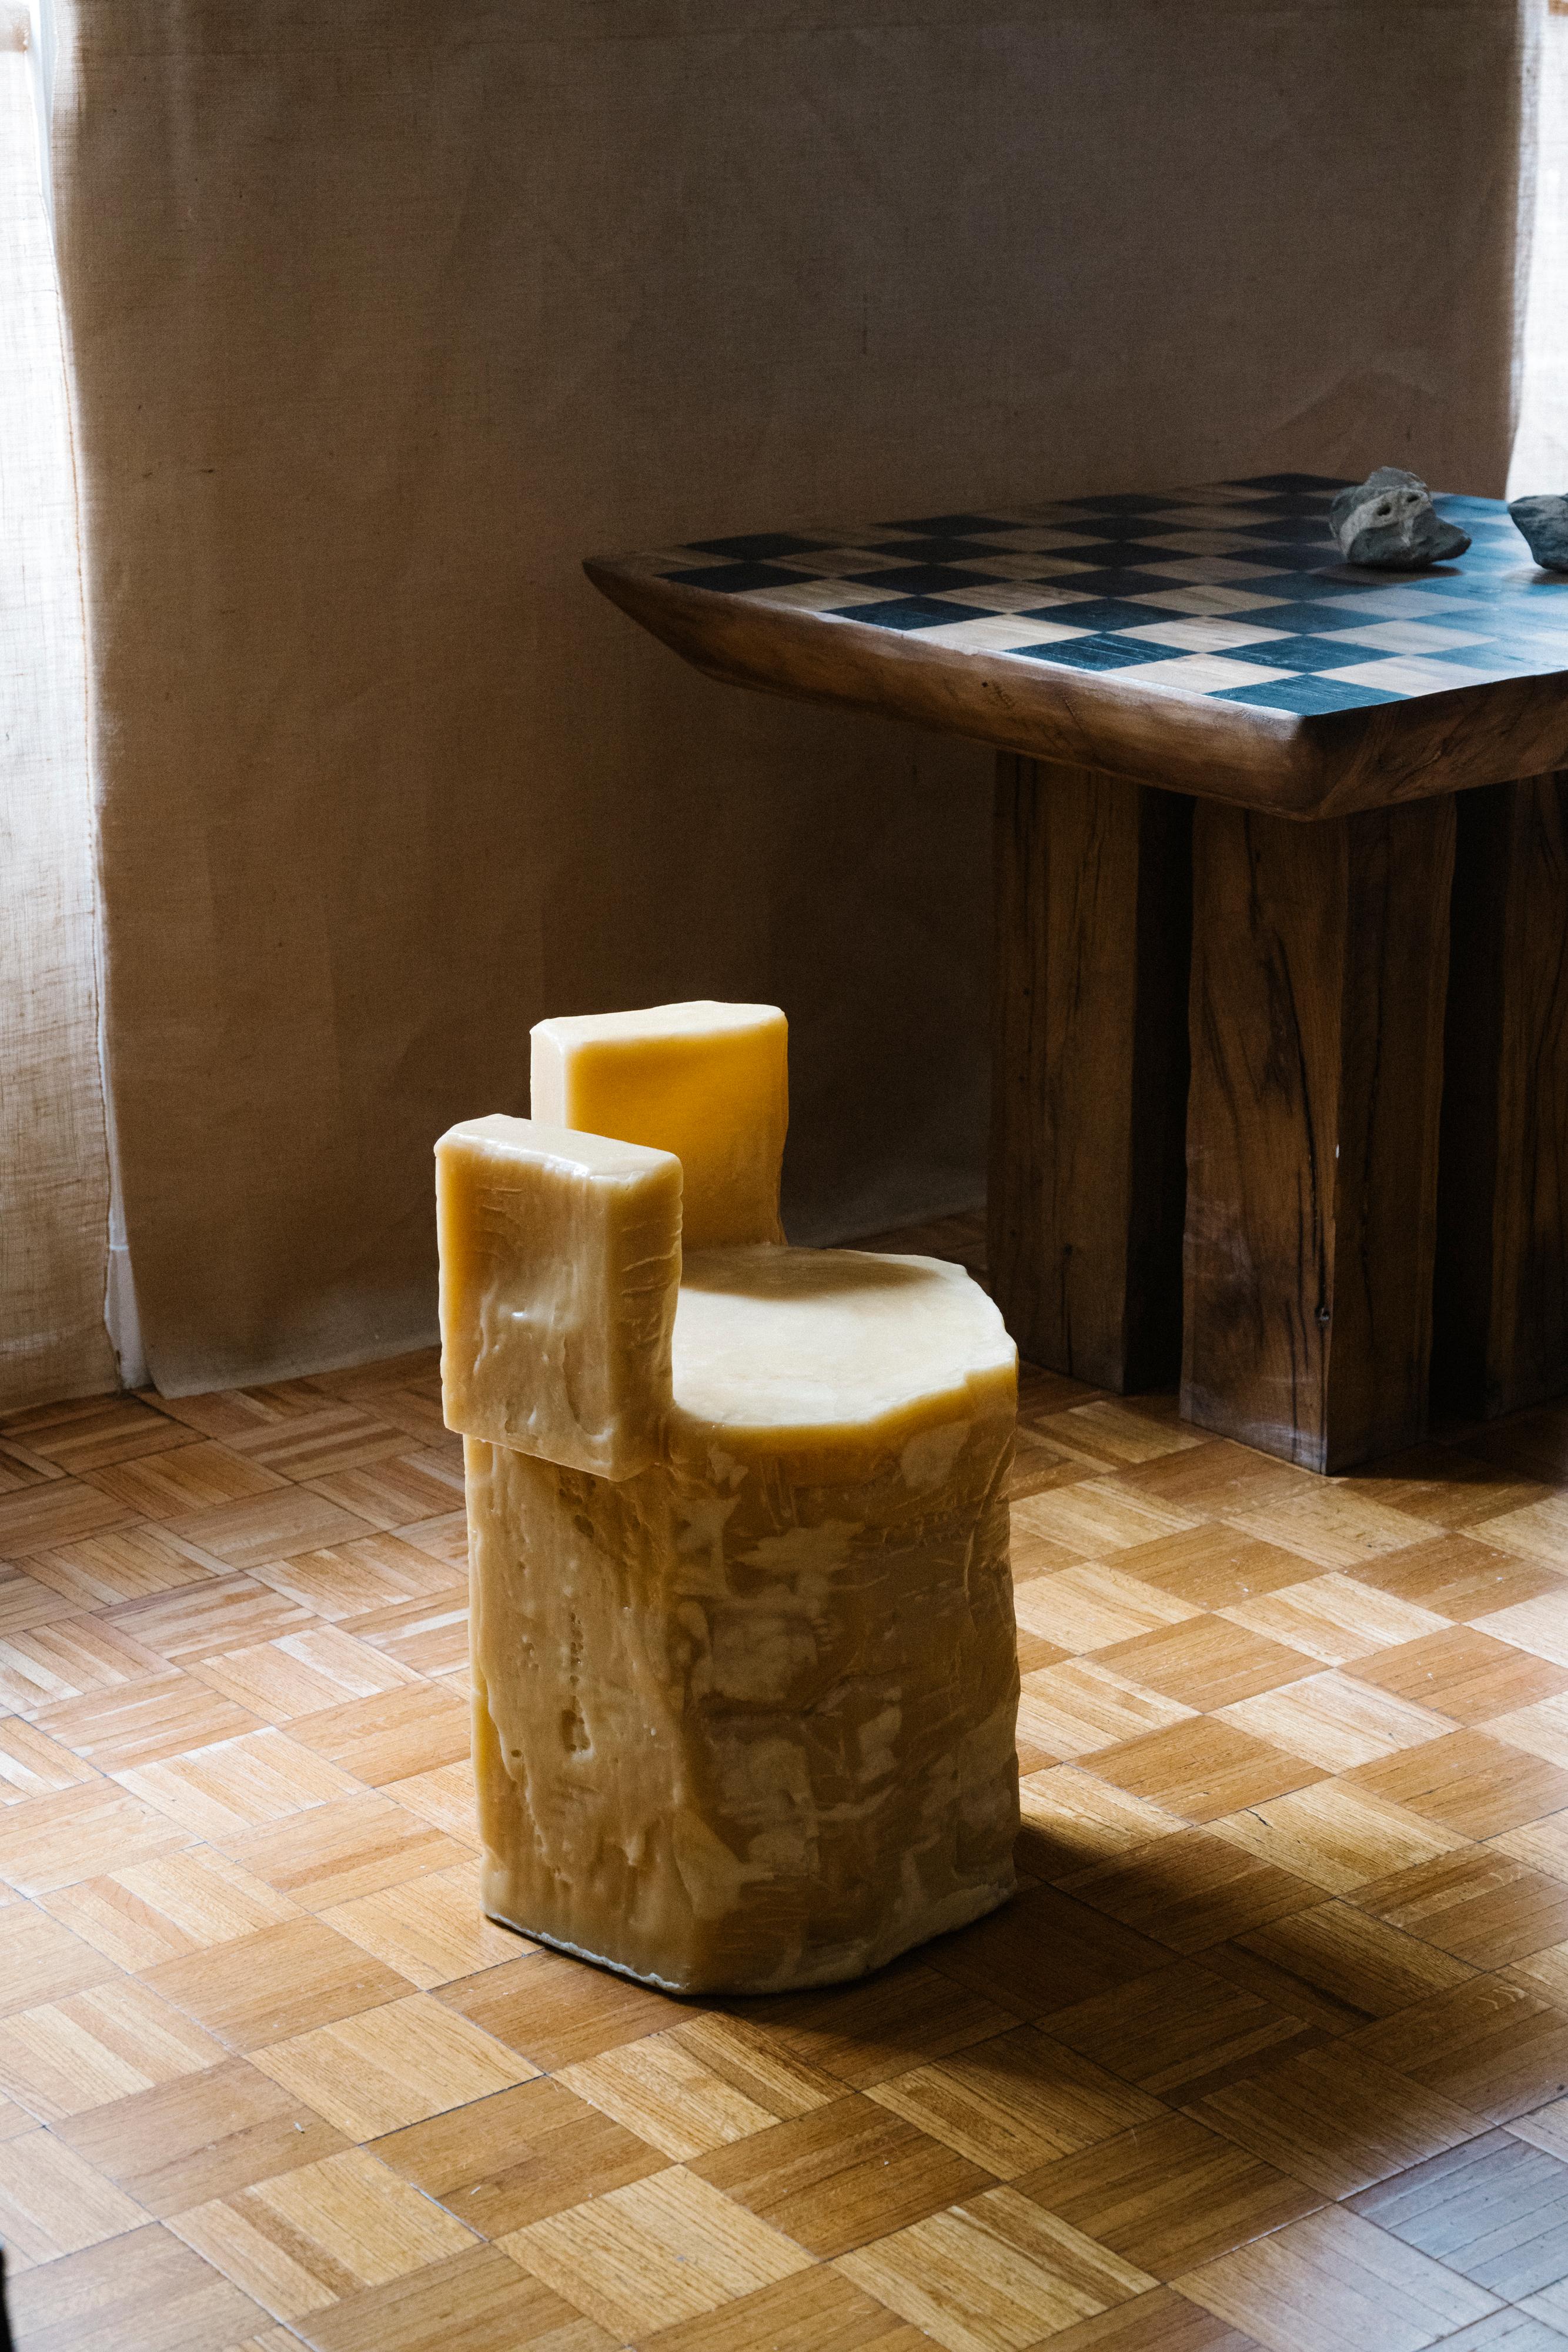 This one-of-a-kind sculptural beeswax chair with sides is designed by Rooms Studio in collaboration with Shotiko Aptsiauri and was produced in Tbilisi, Georgia. The molded, beeswax sculpture, which can be interpreted as a stool, seat, side table or